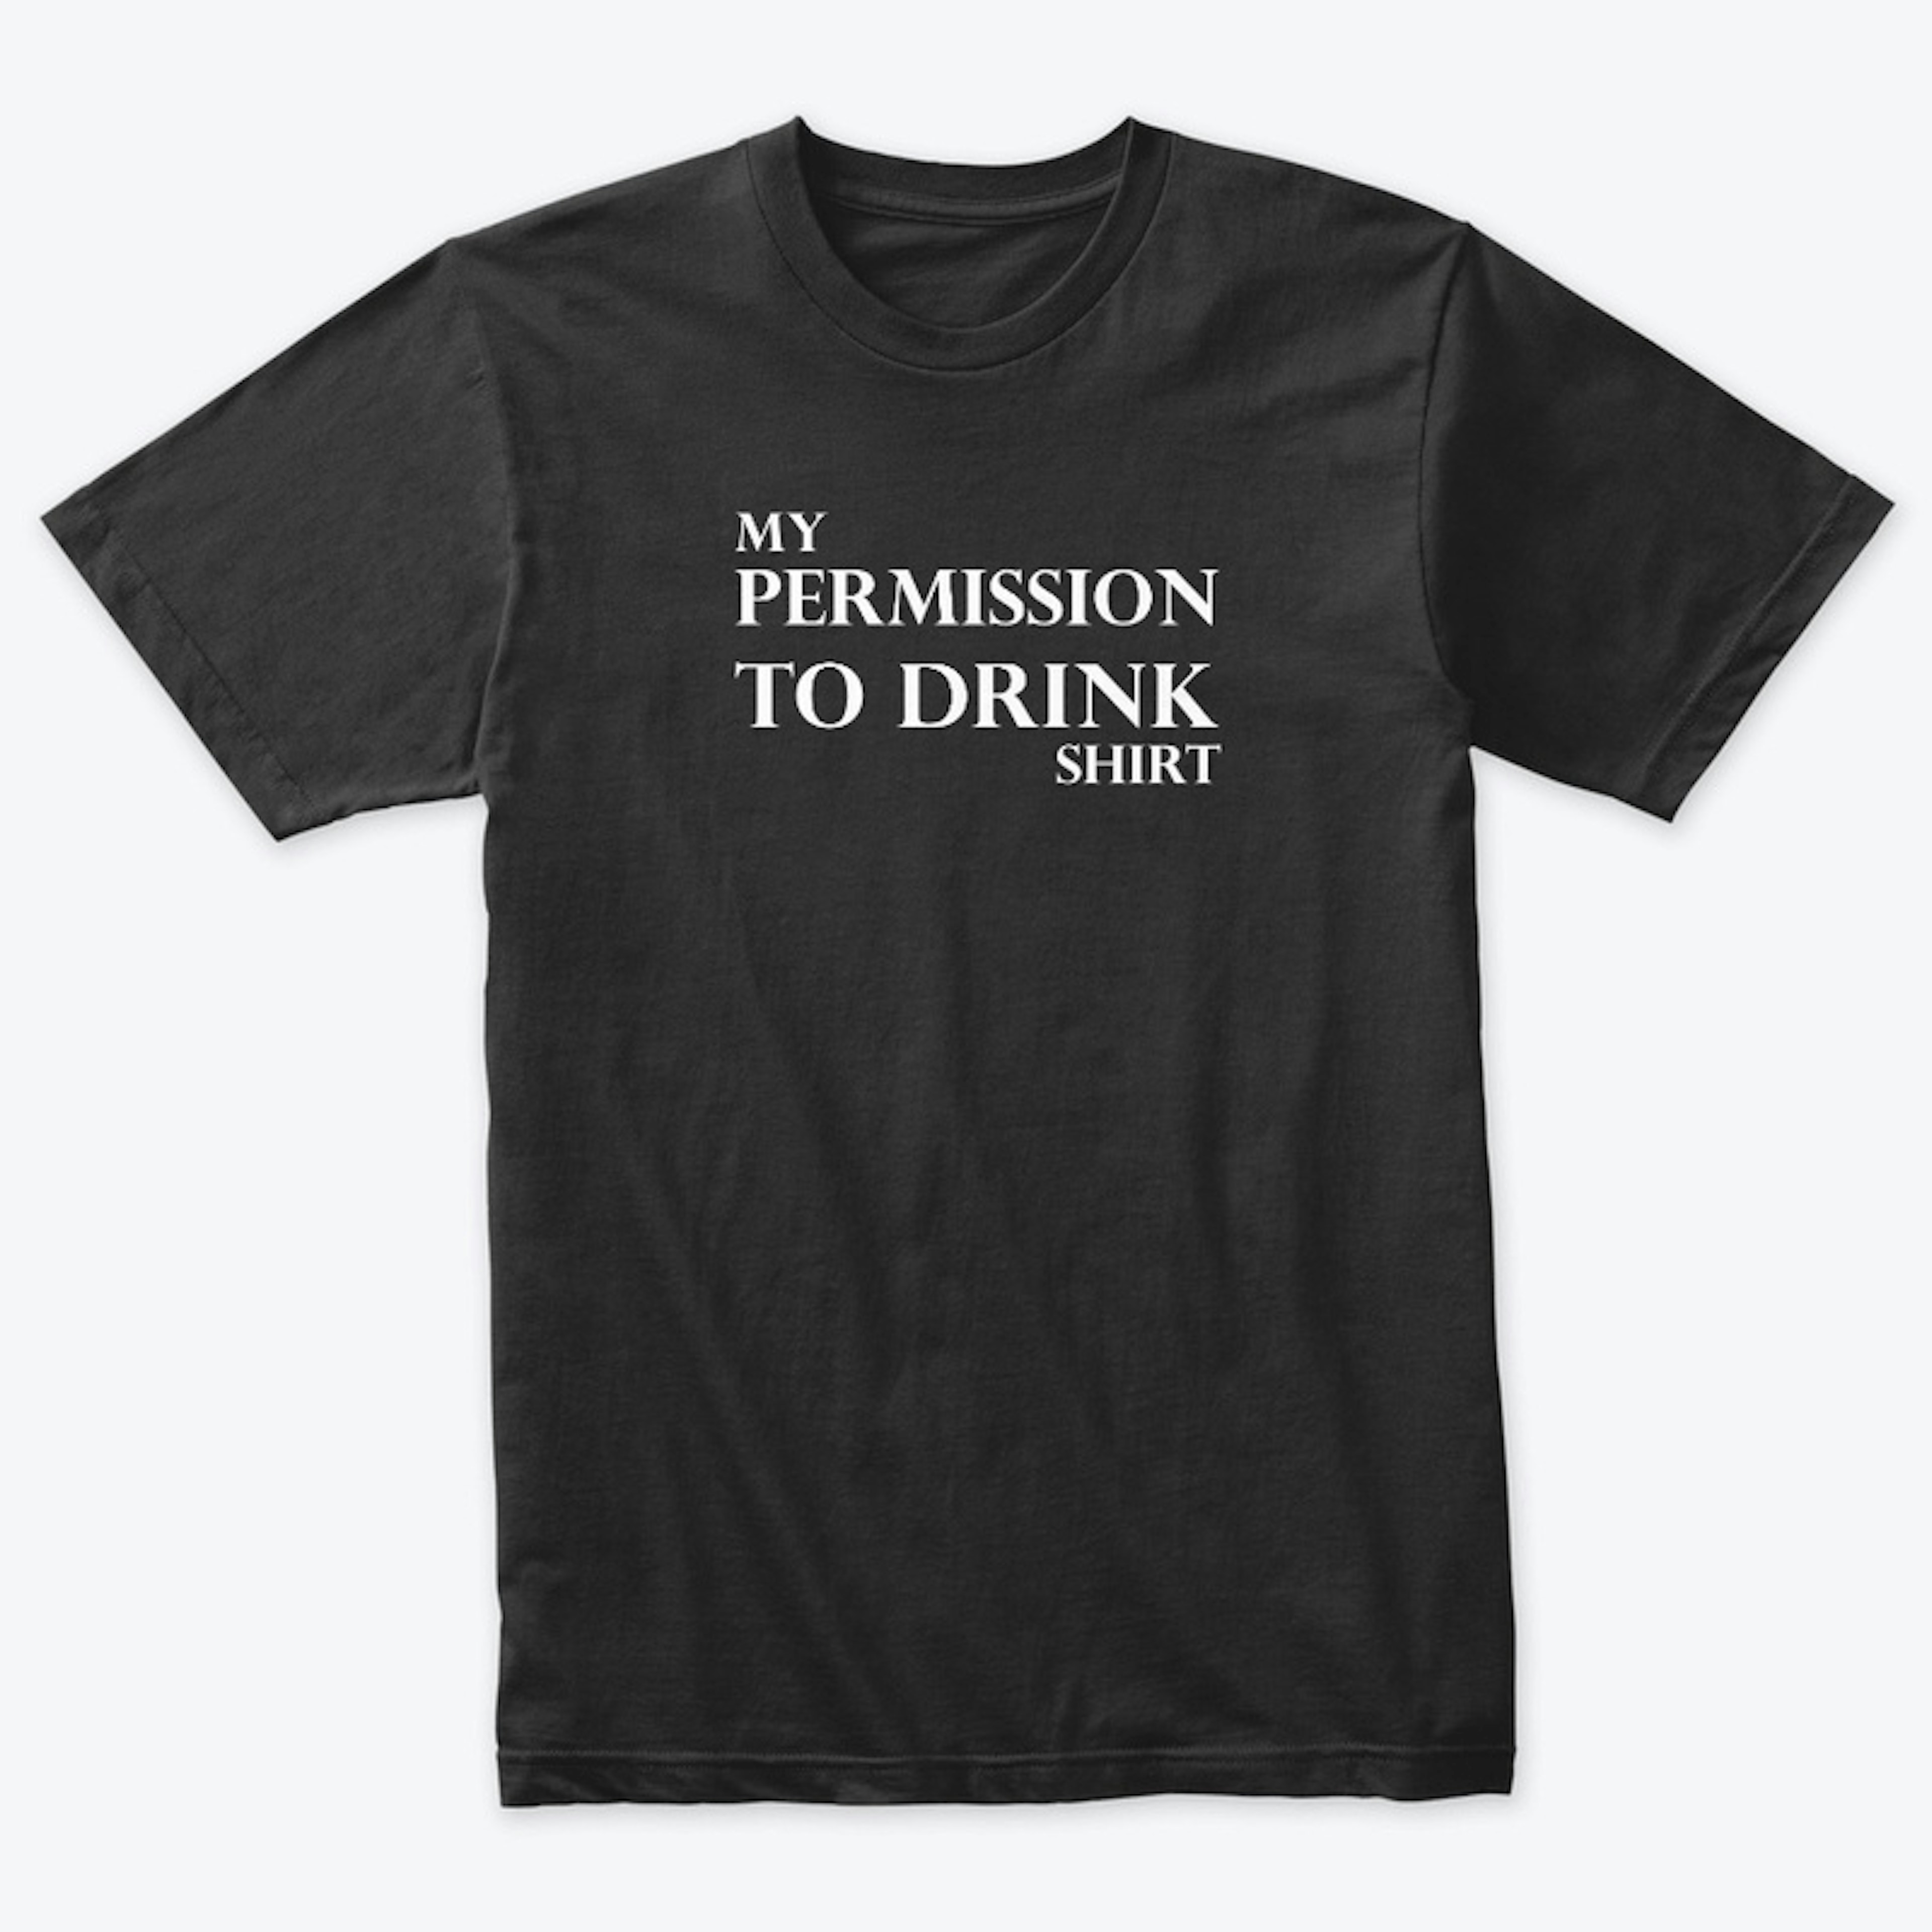 My permission to drink shirt